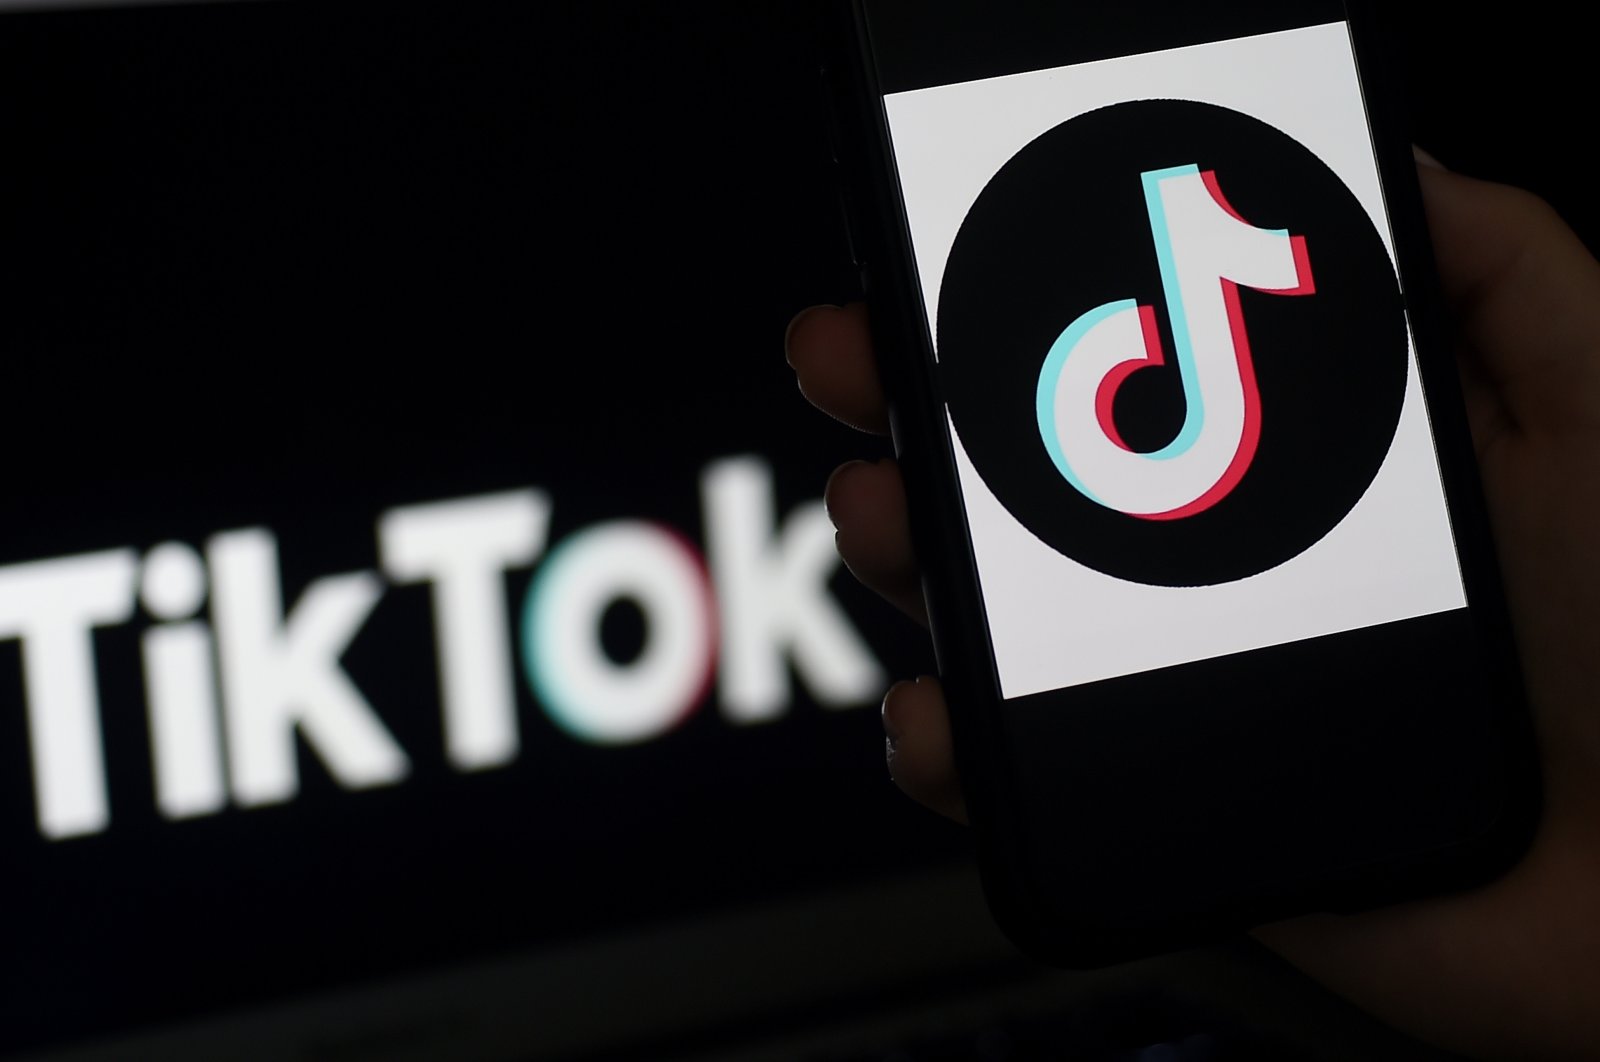 Social media application TikTok's logo is displayed on the screen of an iPhone in Arlington, U.S., April 13, 2020. (AFP Photo)